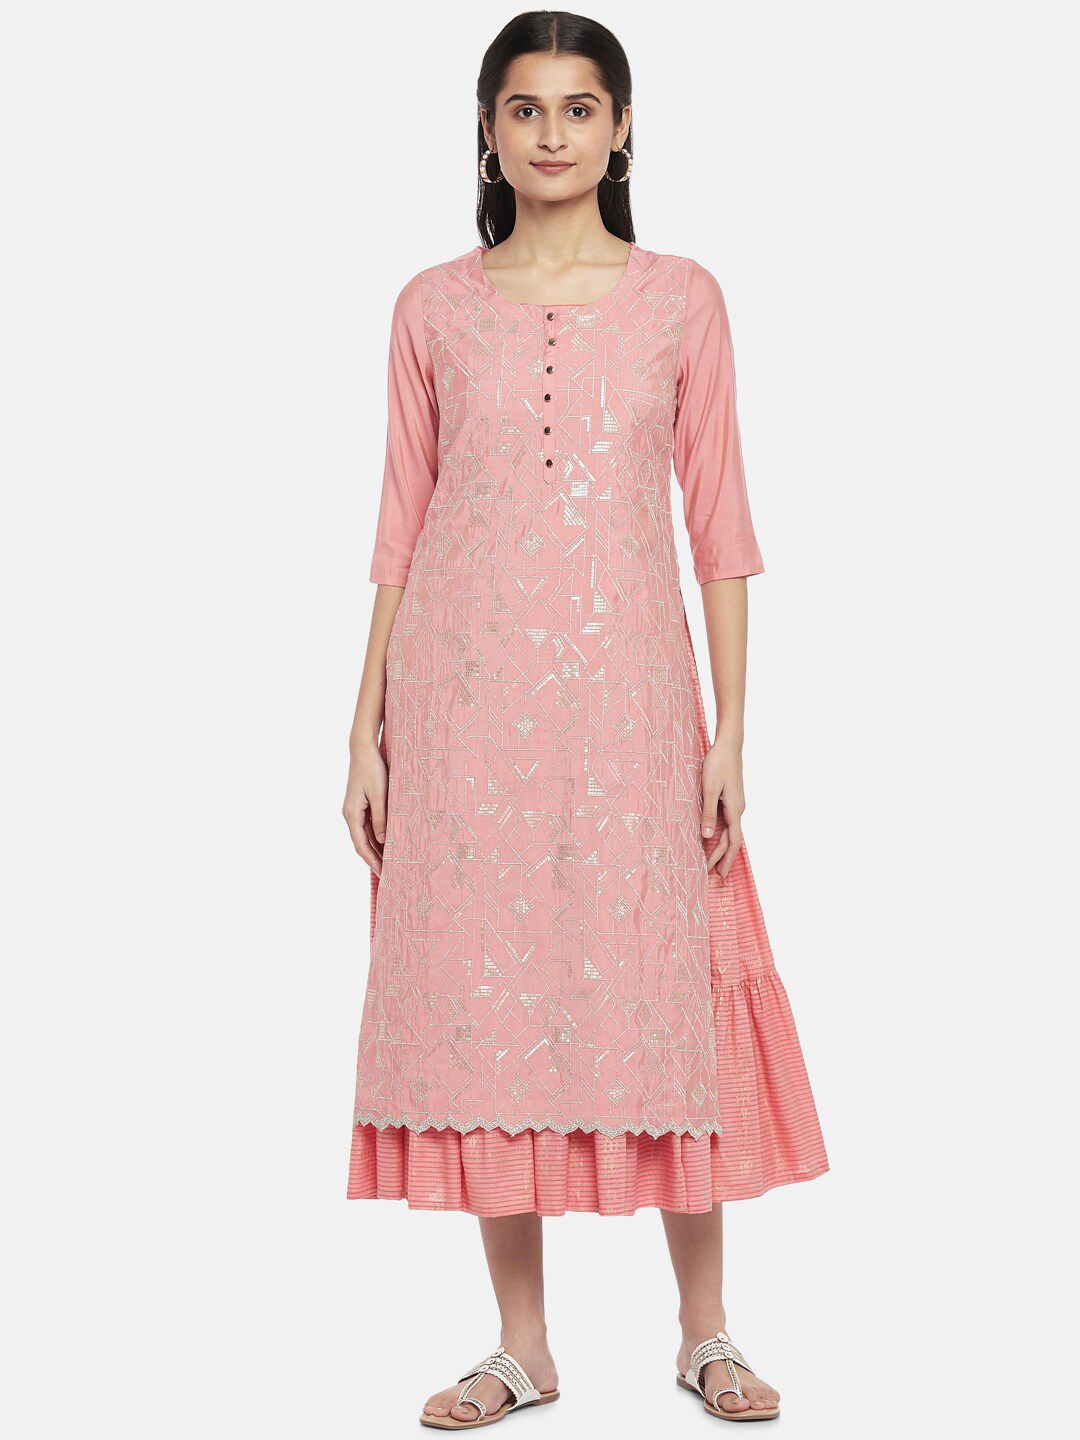 RANGMANCH BY PANTALOONS Peach-Coloured Floral Layered Ethnic A-Line Midi Dress Price in India